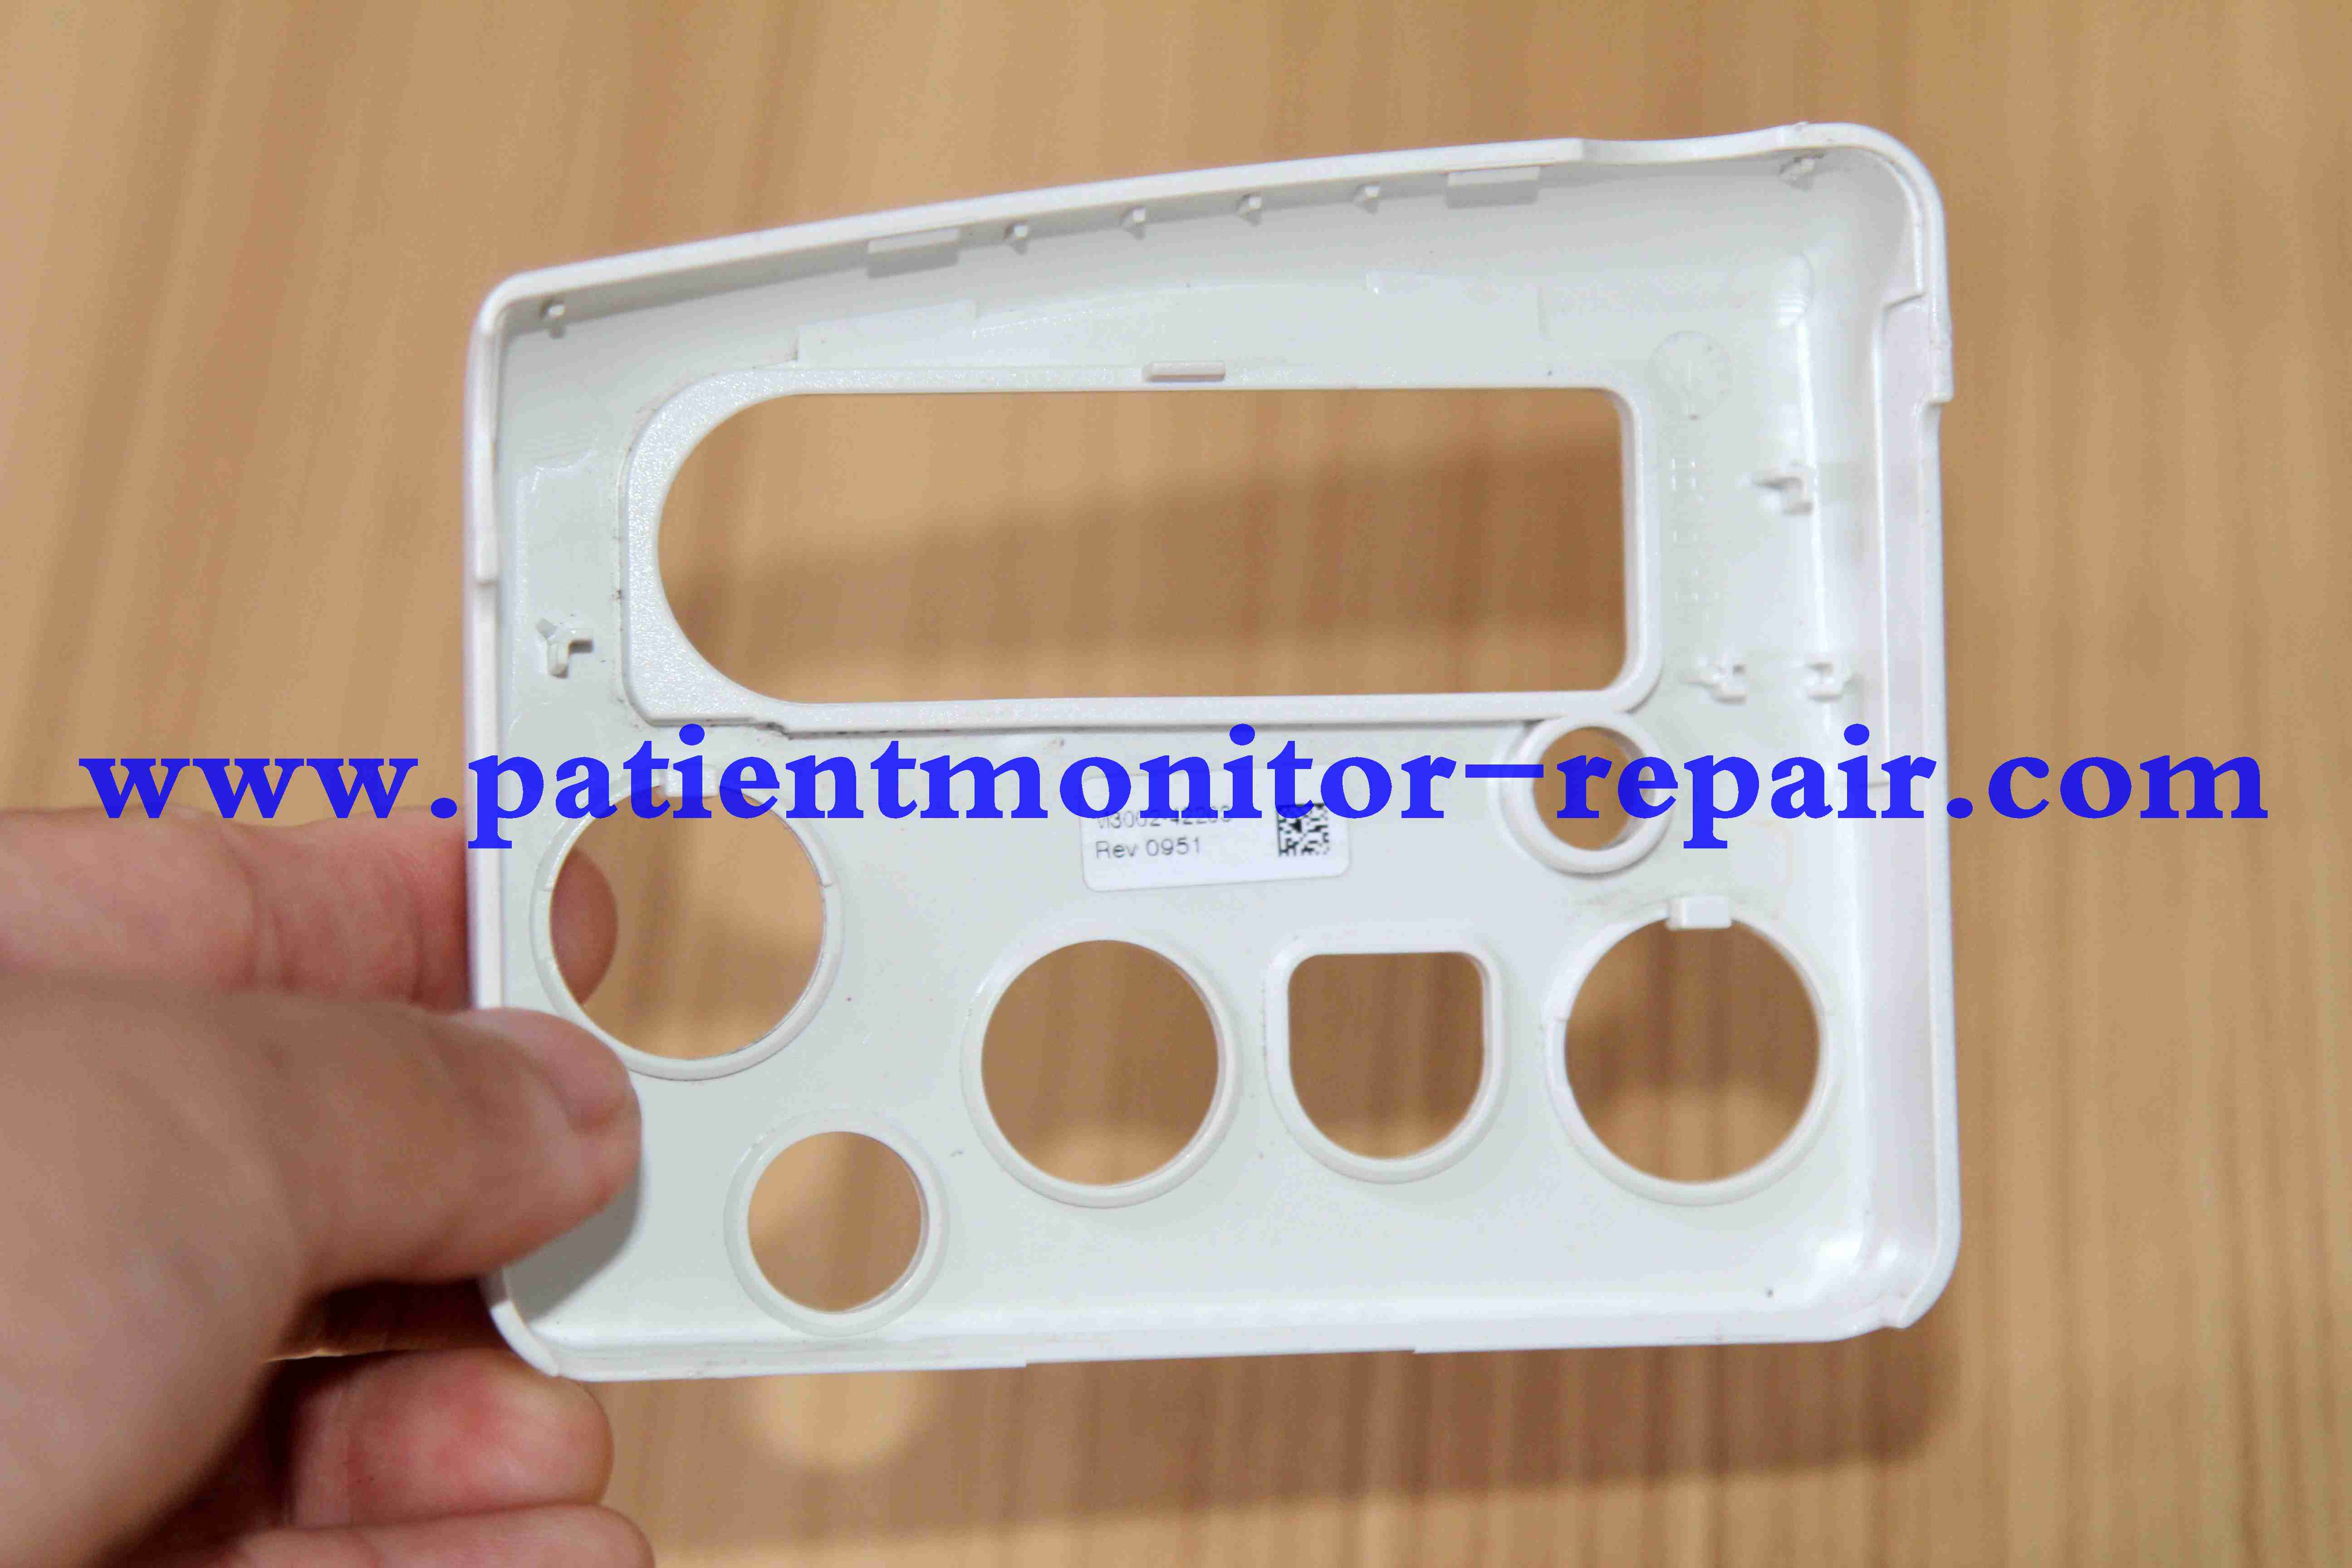  IntelliVue X2 patient monitor connector panel